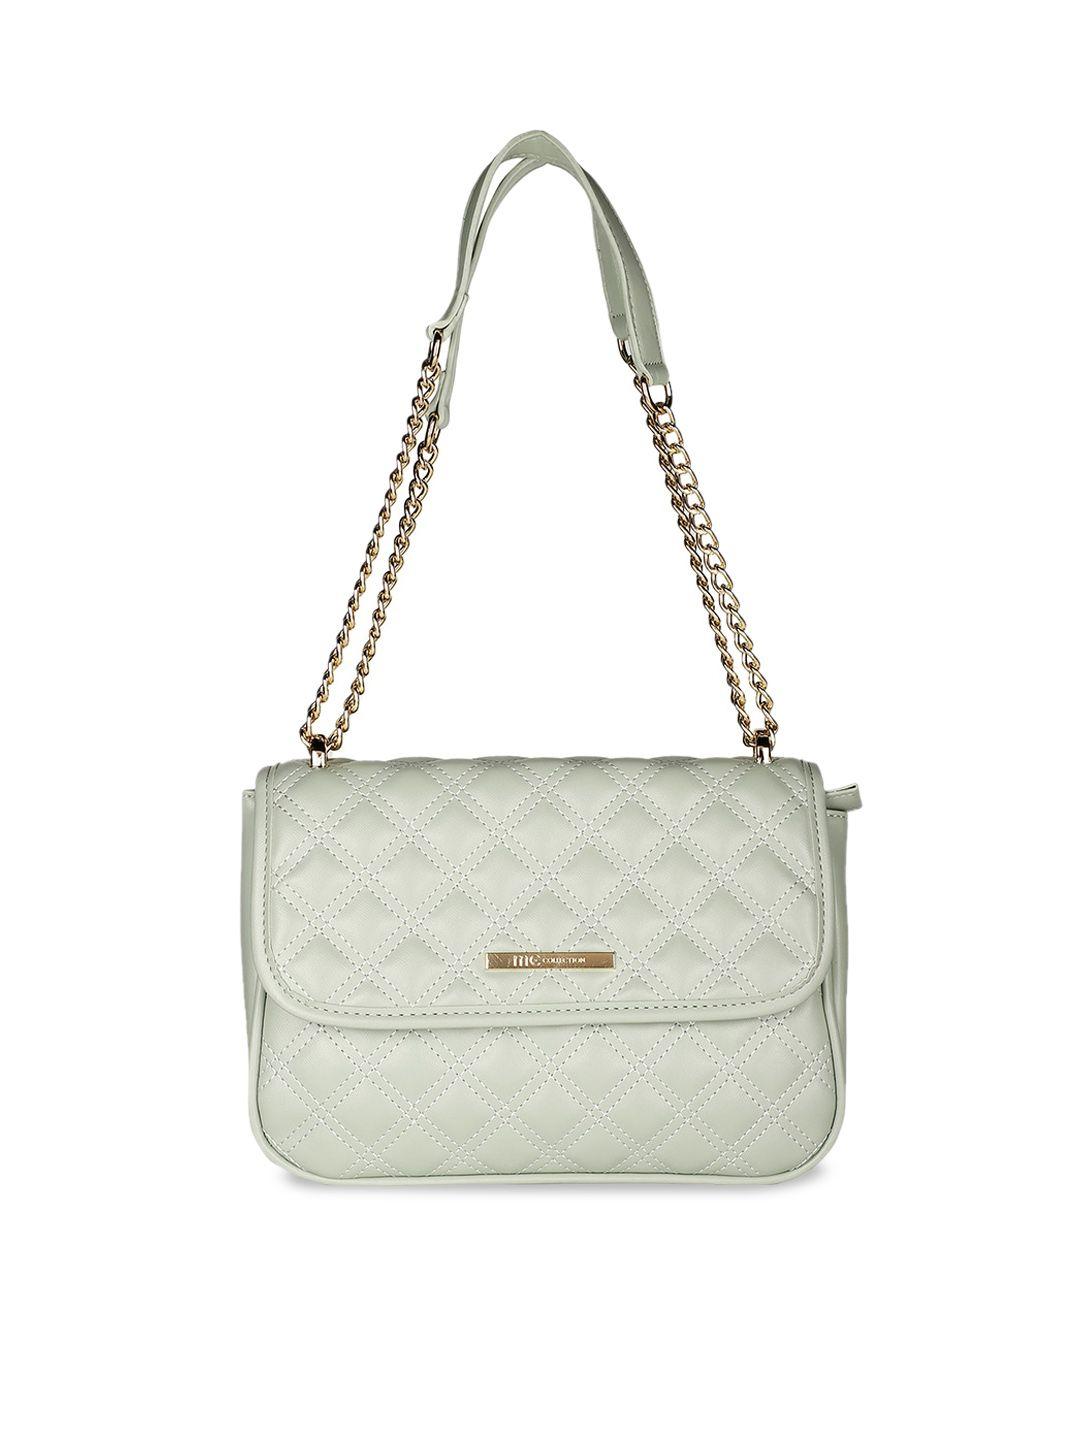 marie claire green geometric textured leather structured shoulder bag